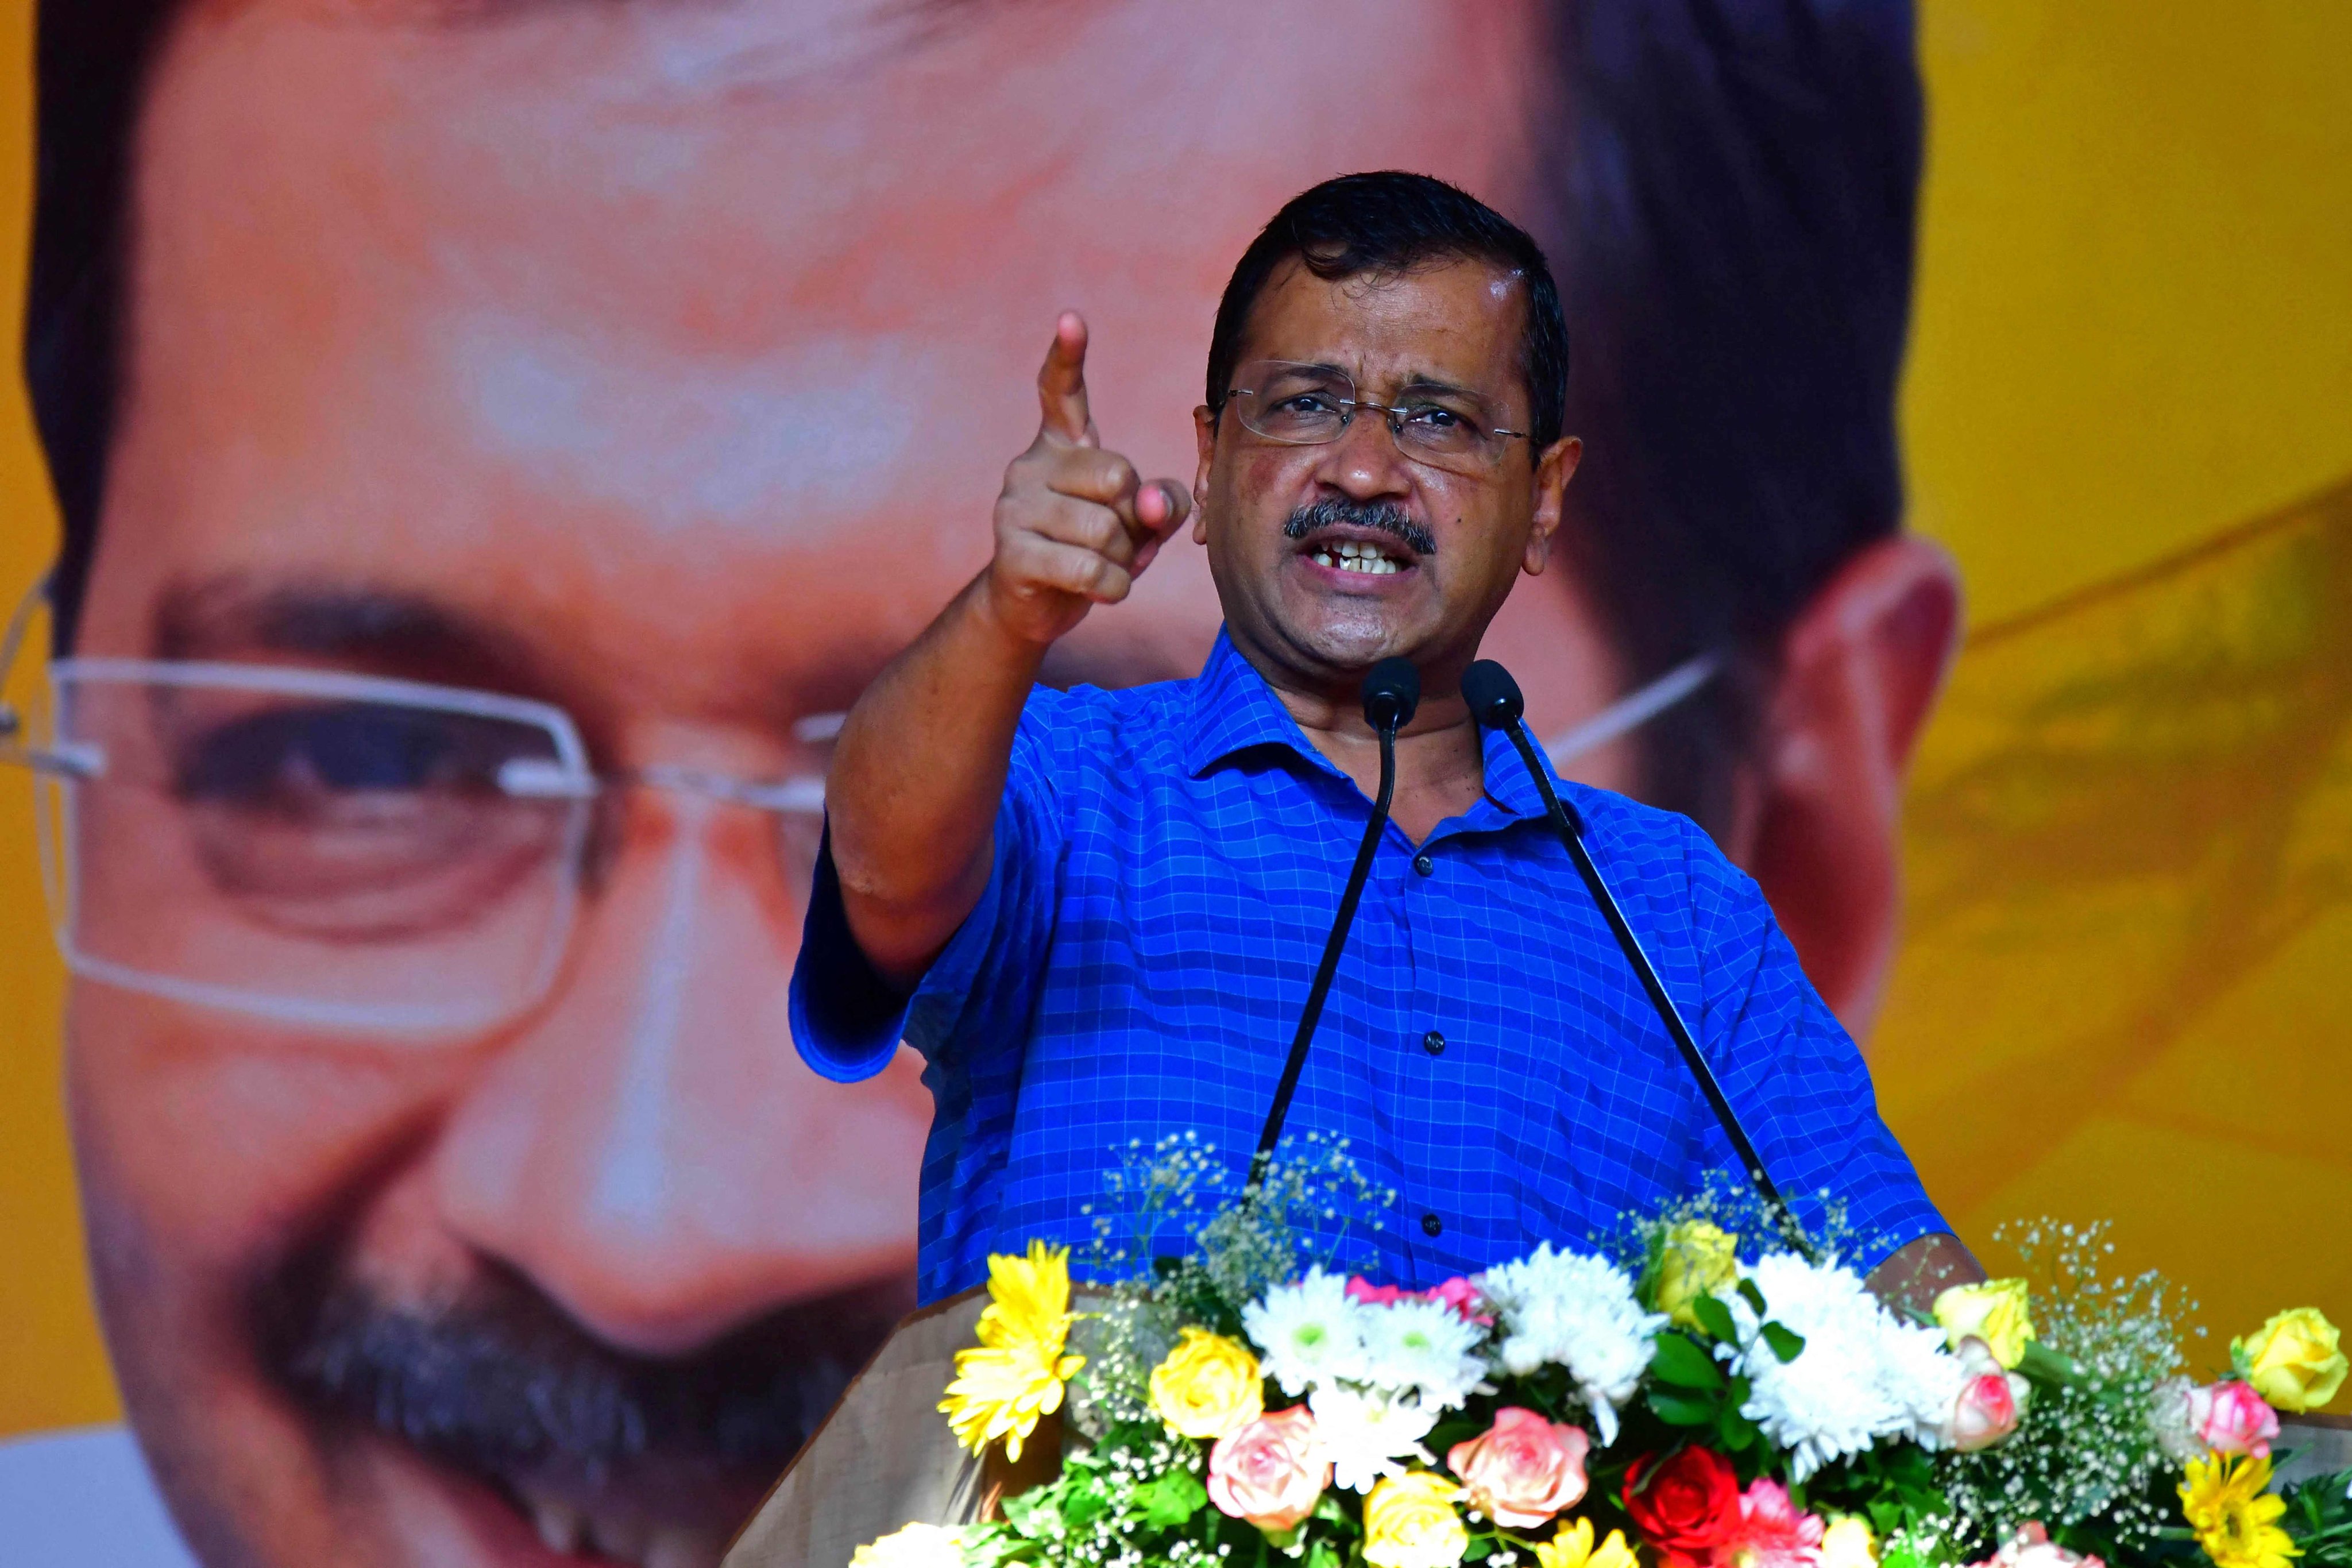 India’s Supreme Court on Friday ordered jailed Delhi chief minister Arvind Kejriwal, a top opponent of Prime Minister Narendra Modi, to be released on bail to allow him to campaign in the ongoing national election. Photo: AFP